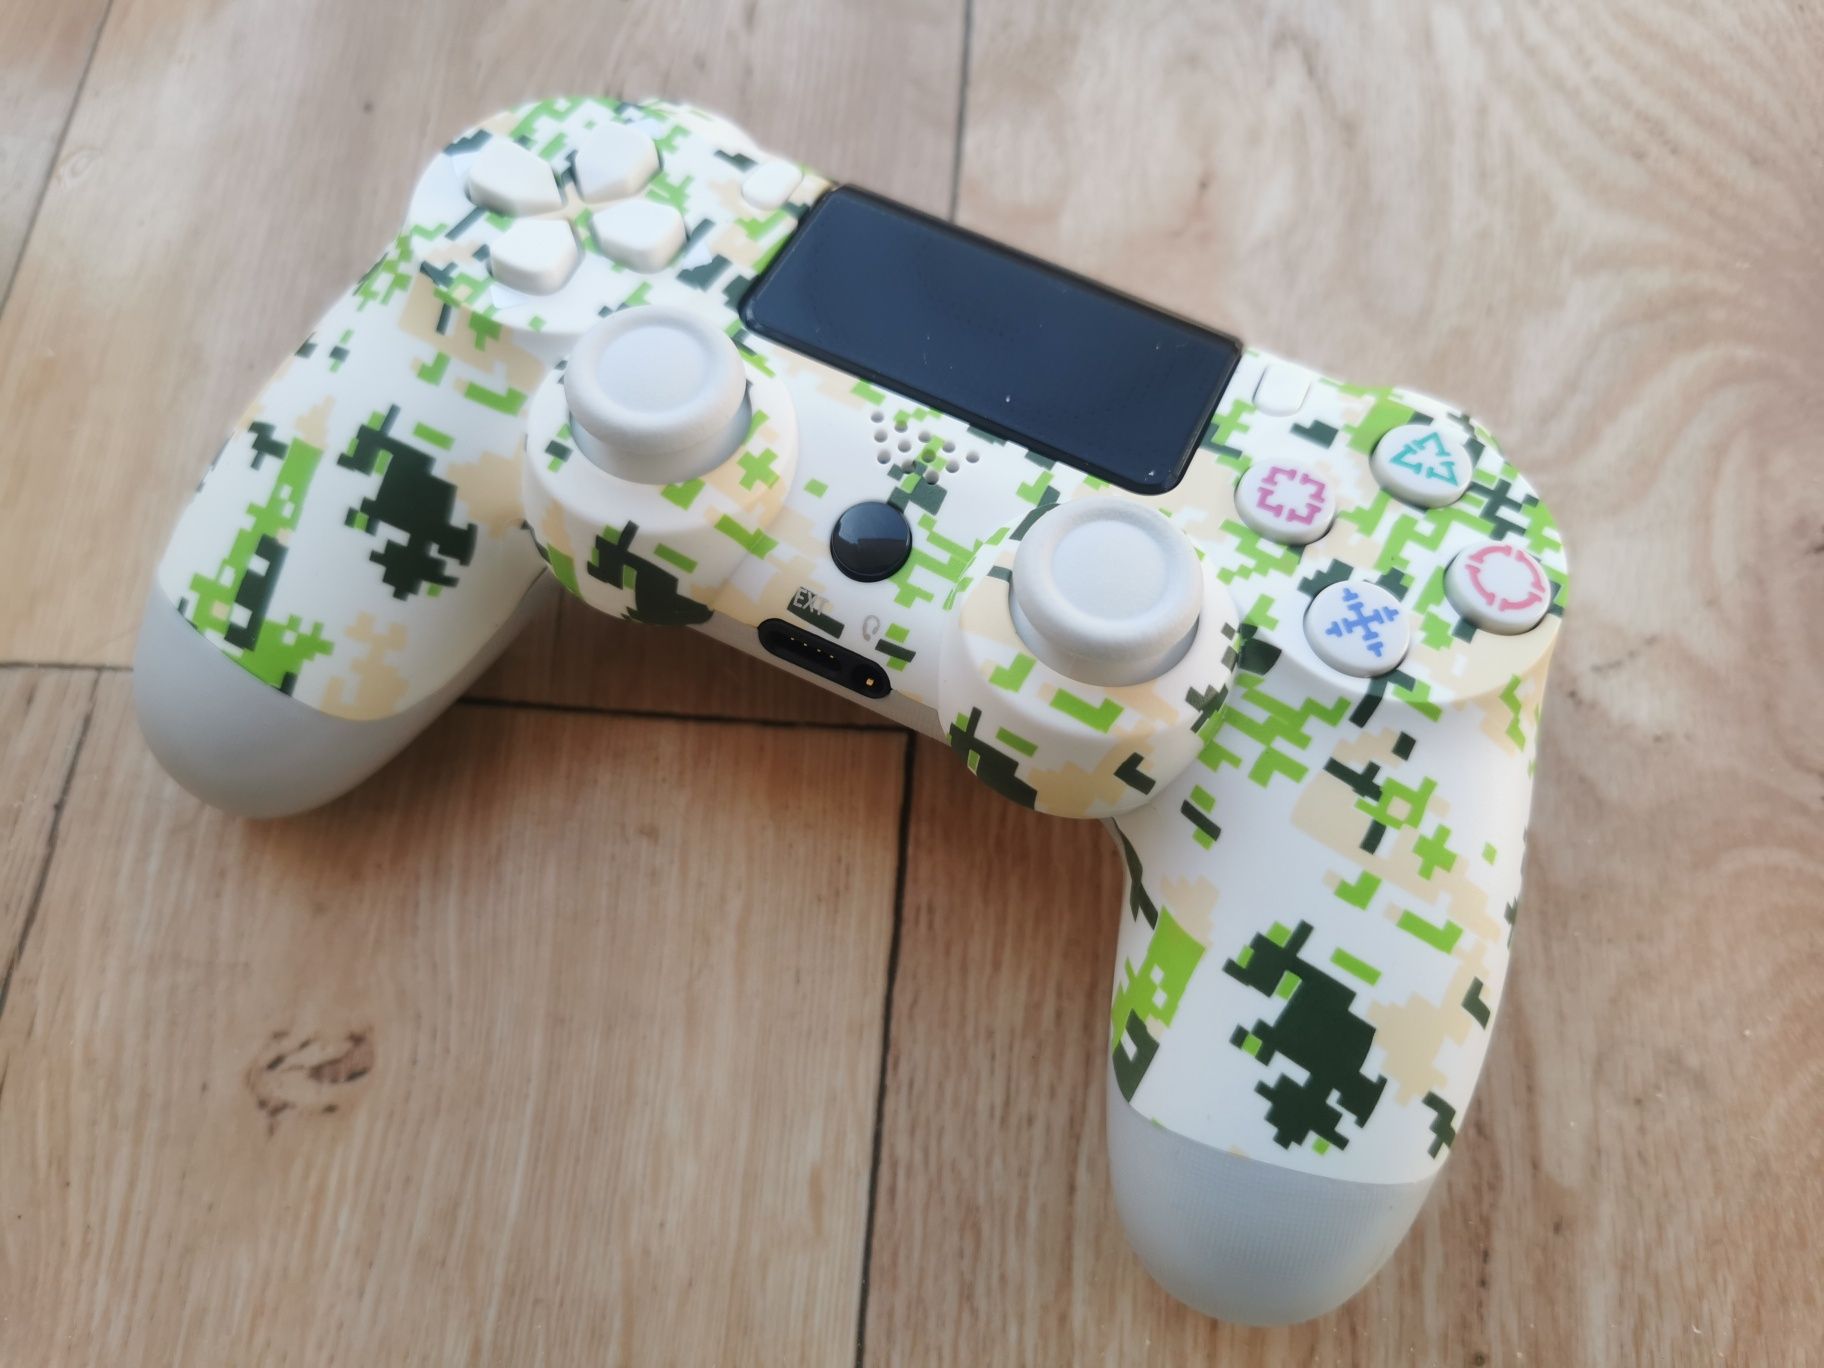 Controller PS4 Army edition